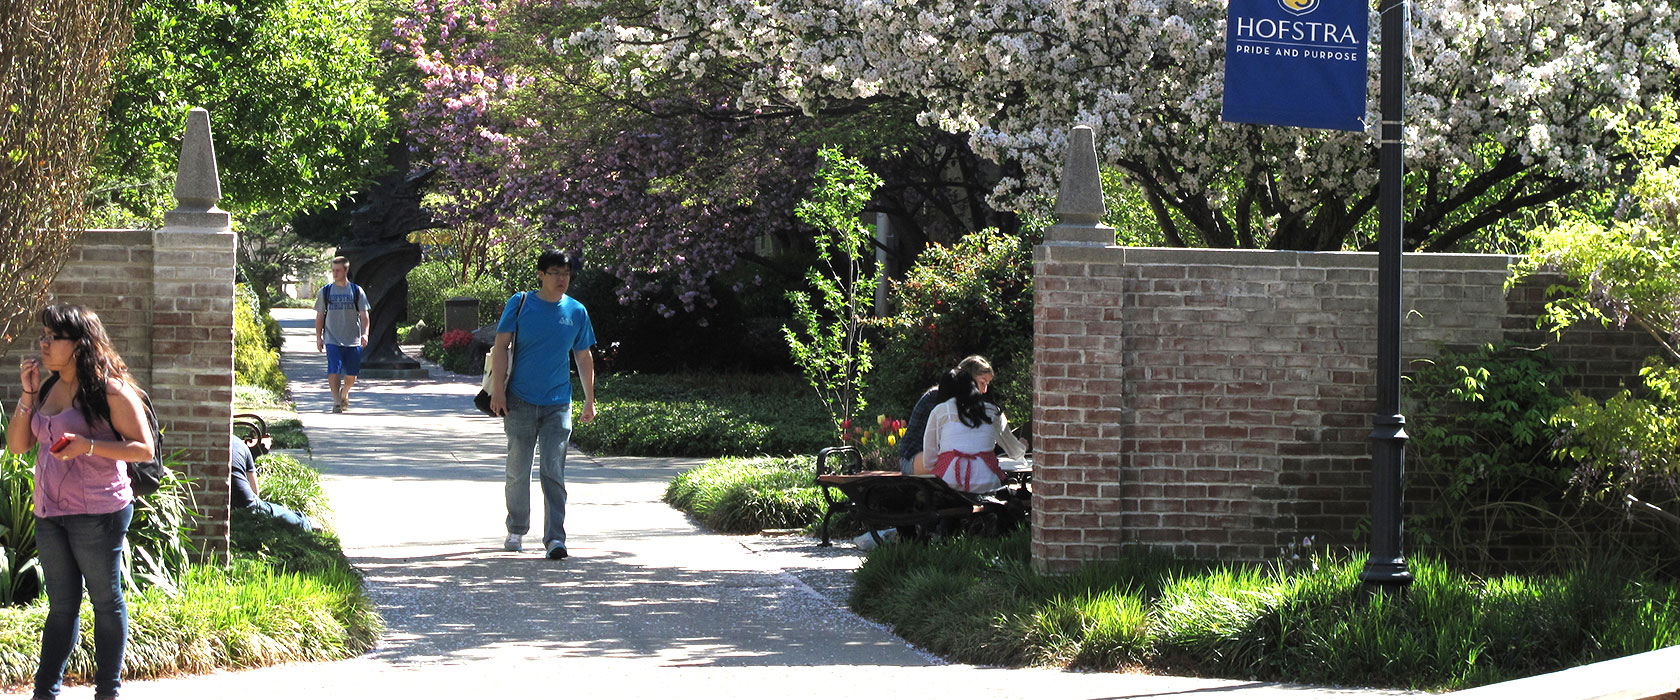 Students Walking on Campus